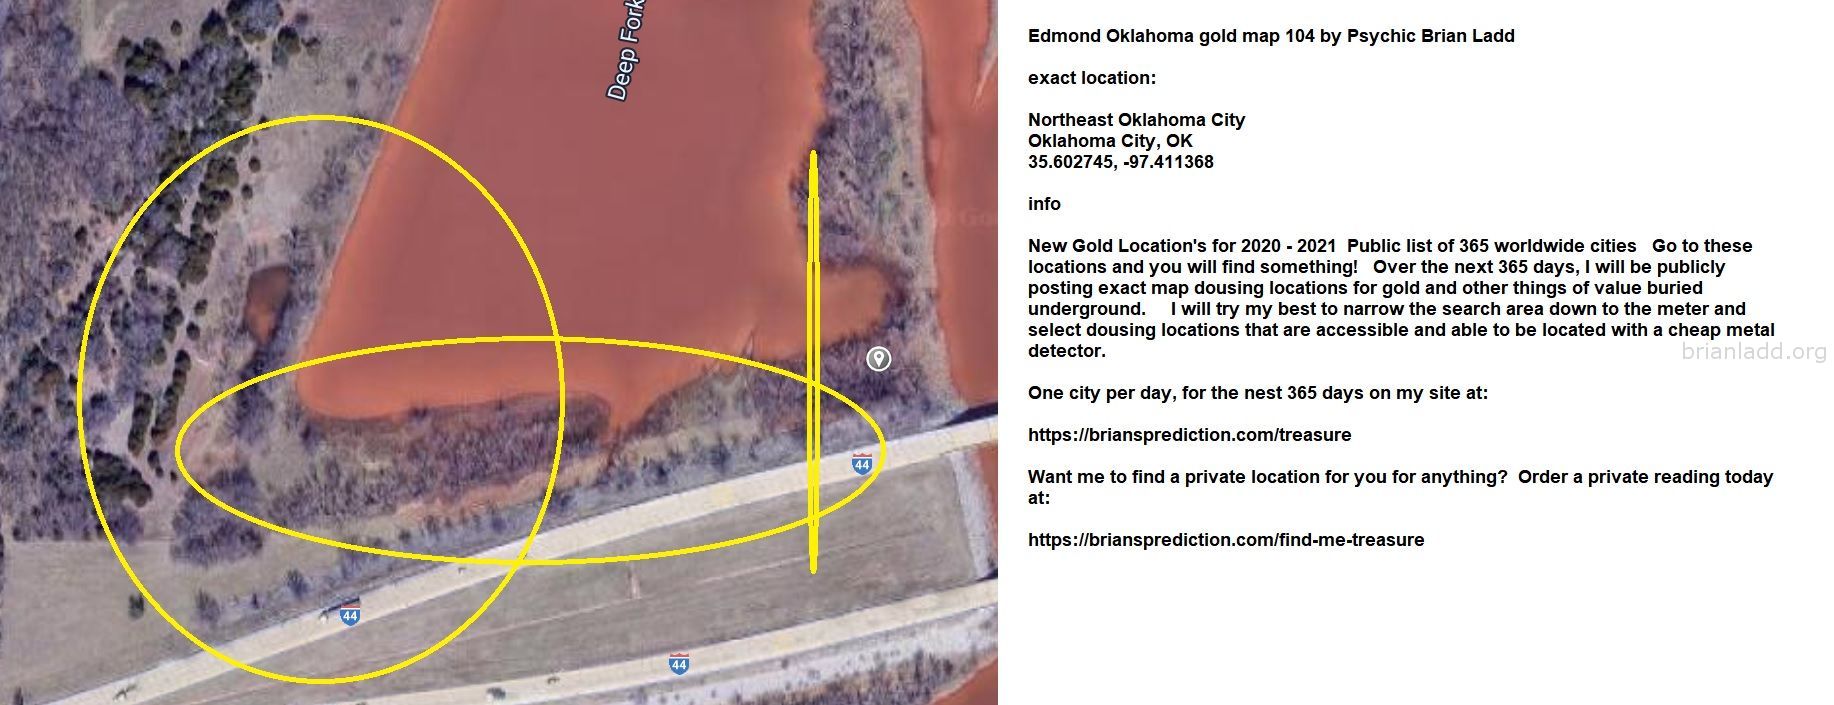 Edmond Oklahoma Gold Map 104 By Psychic Brian Ladd - Edmond Oklahoma Gold Map 104 by Psychic Brian Ladd Exact Location: ...
Edmond Oklahoma Gold Map 104 by Psychic Brian Ladd Exact Location: Northeast Oklahoma City Oklahoma City, Ok 35.602745, -97.411368 Info New Gold Location's for 2020 - 2021 Public List of 365 Worldwide Cities Go to These Locations and You Will Find Something! Over the Next 365 Days, I Will Be Publicly Posting Exact Map Dousing Locations for Gold and Other Things of Value Buried Underground. I Will Try My Best to Narrow the Search Area Down to the Meter and Select Dousing Locations That Are Accessible and Able to Be Located With a Cheap Metal Detector. One City Per Day, for the Nest 365 Days on My Site at:   https://briansprediction.com/treasure Want Me to Find a Private Location for You for Anything? Order a Private Reading Today at:   https://briansprediction.com/find-me-treasure
